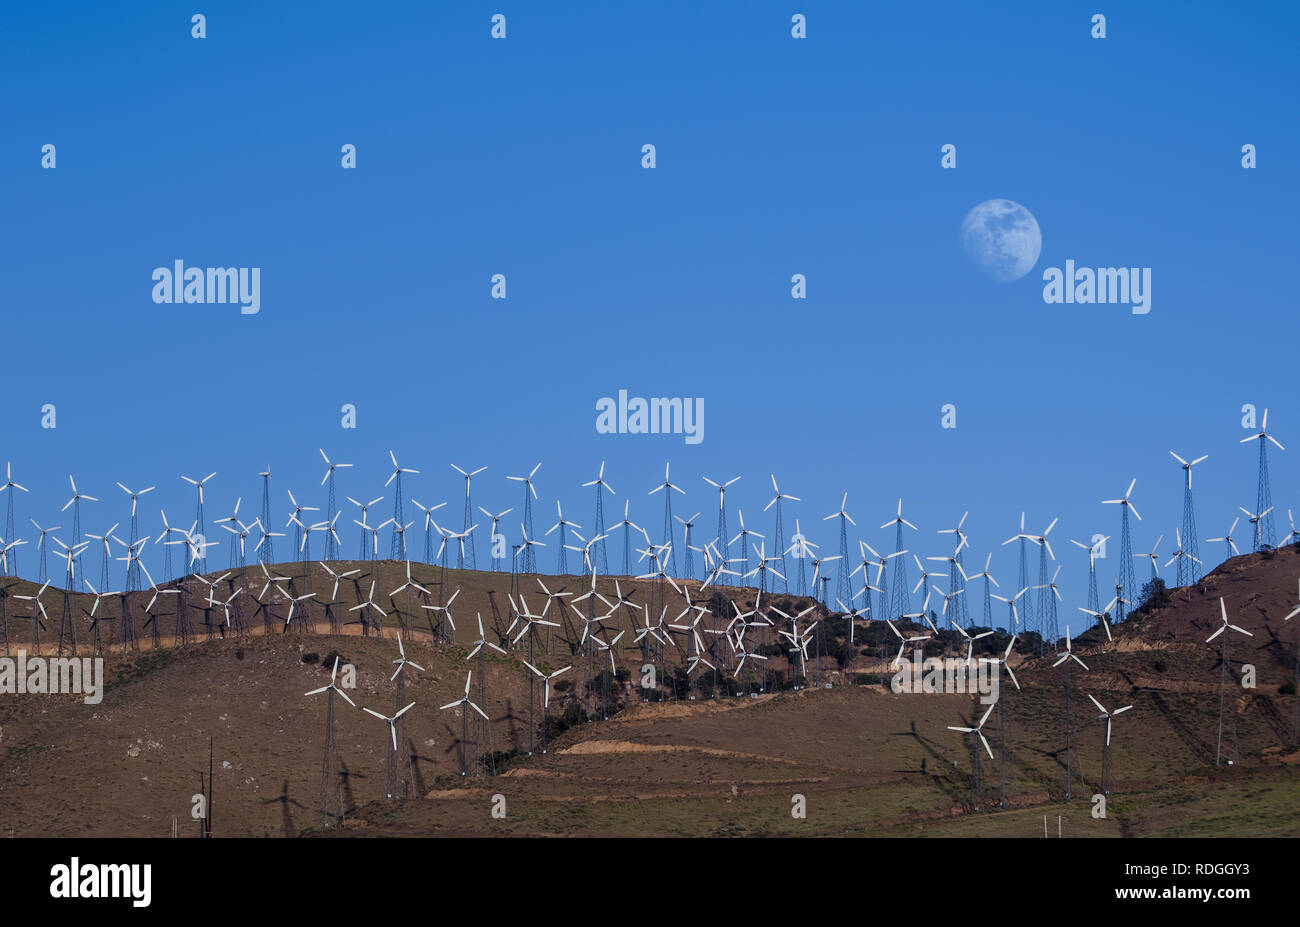 Tehachapi, California, USA - June 12, 2011: Wind farms in wind power generation. Mechanical energy being transformed into electrical energy, with the  Stock Photo